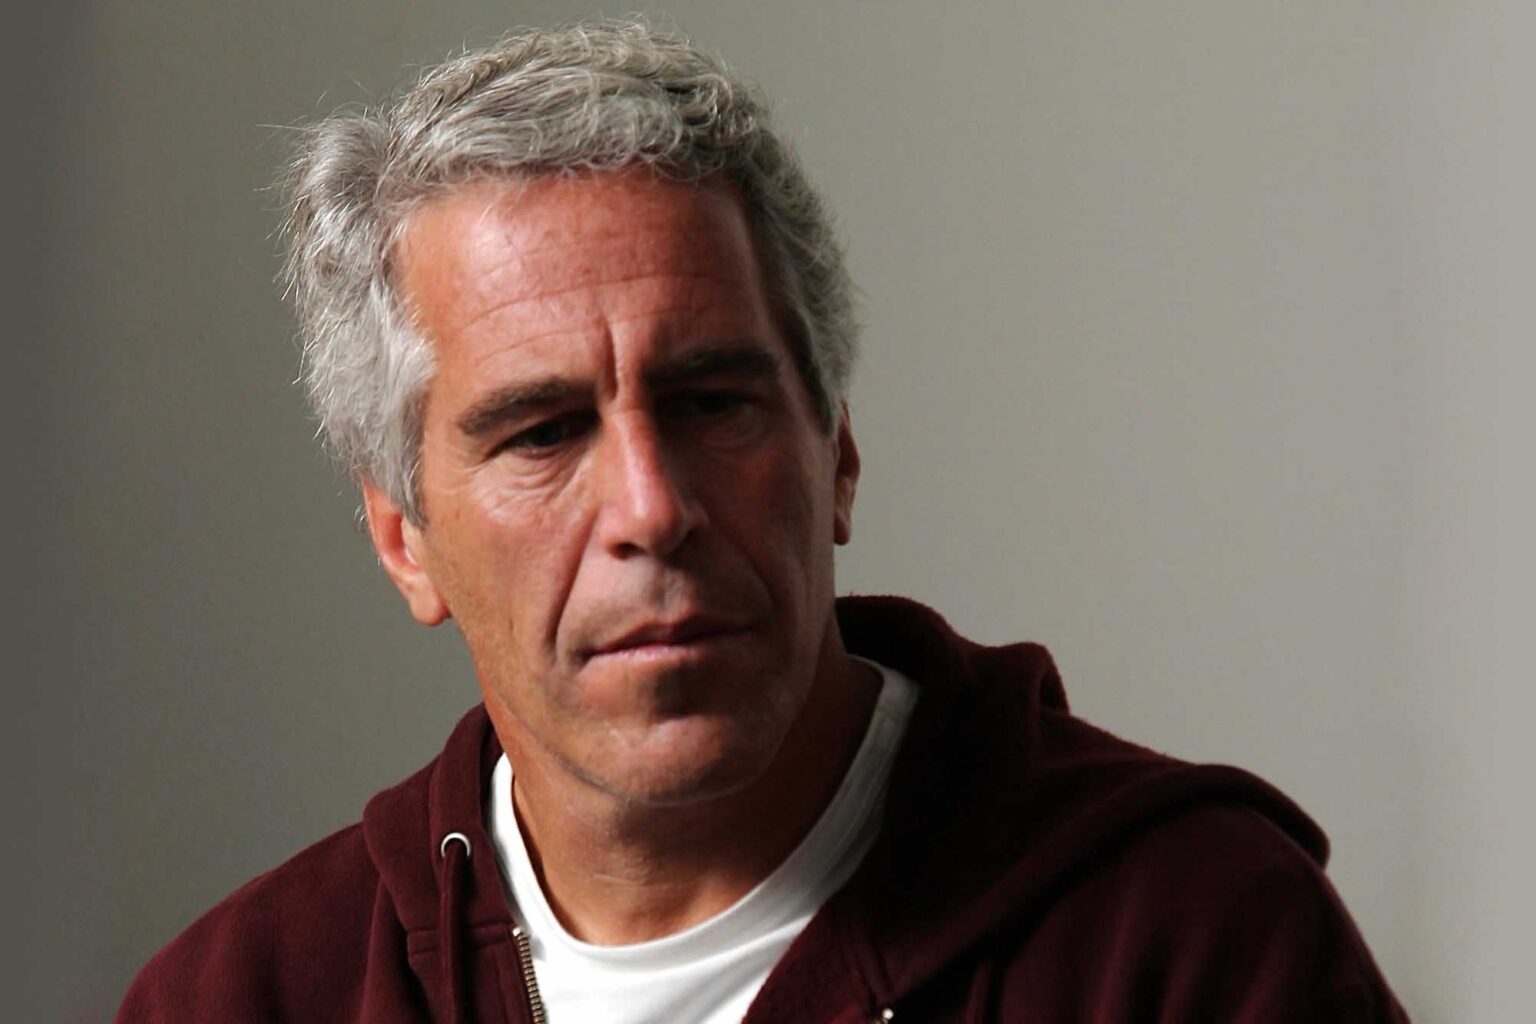 Is it possible Jeffrey Epstein faked his death? Find out everything about the conspiracy theory.